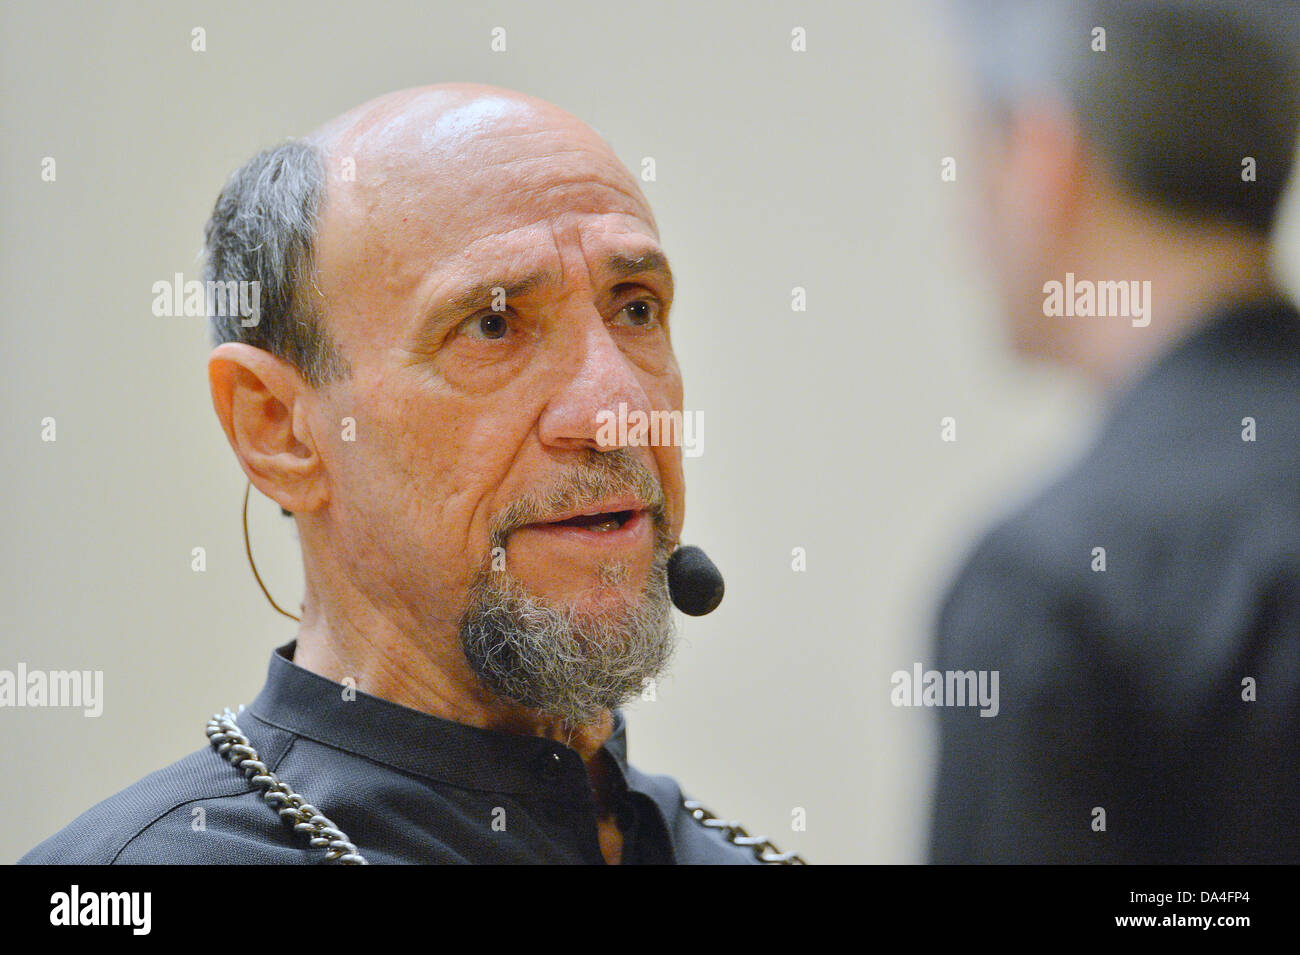 US actor Fahrid Murray Abraham, known for his role of Salieri in Milos Forman's Amadeus, is seen at rehearsal of A Grateful Tail Symphony by Steven Mercurio during the 9th International Music Festival Prague Proms in Municipal House, Prague, Czech Republic, on Wednesday, July 3, 2013. (CTK Photo/Michal Dolezal) Stock Photo